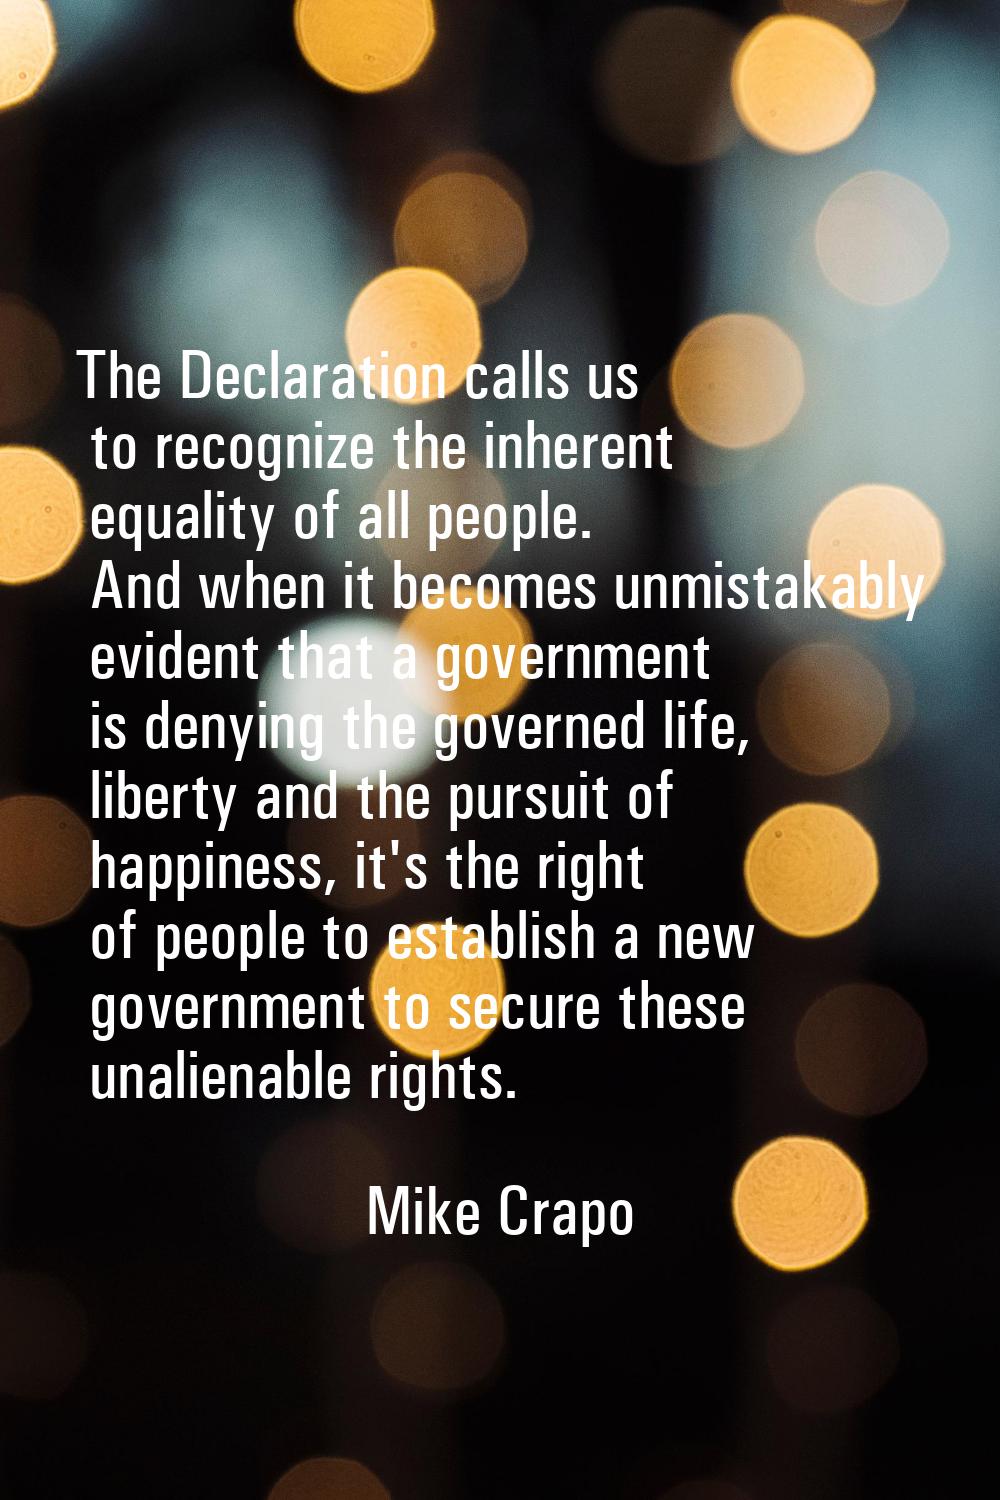 The Declaration calls us to recognize the inherent equality of all people. And when it becomes unmi